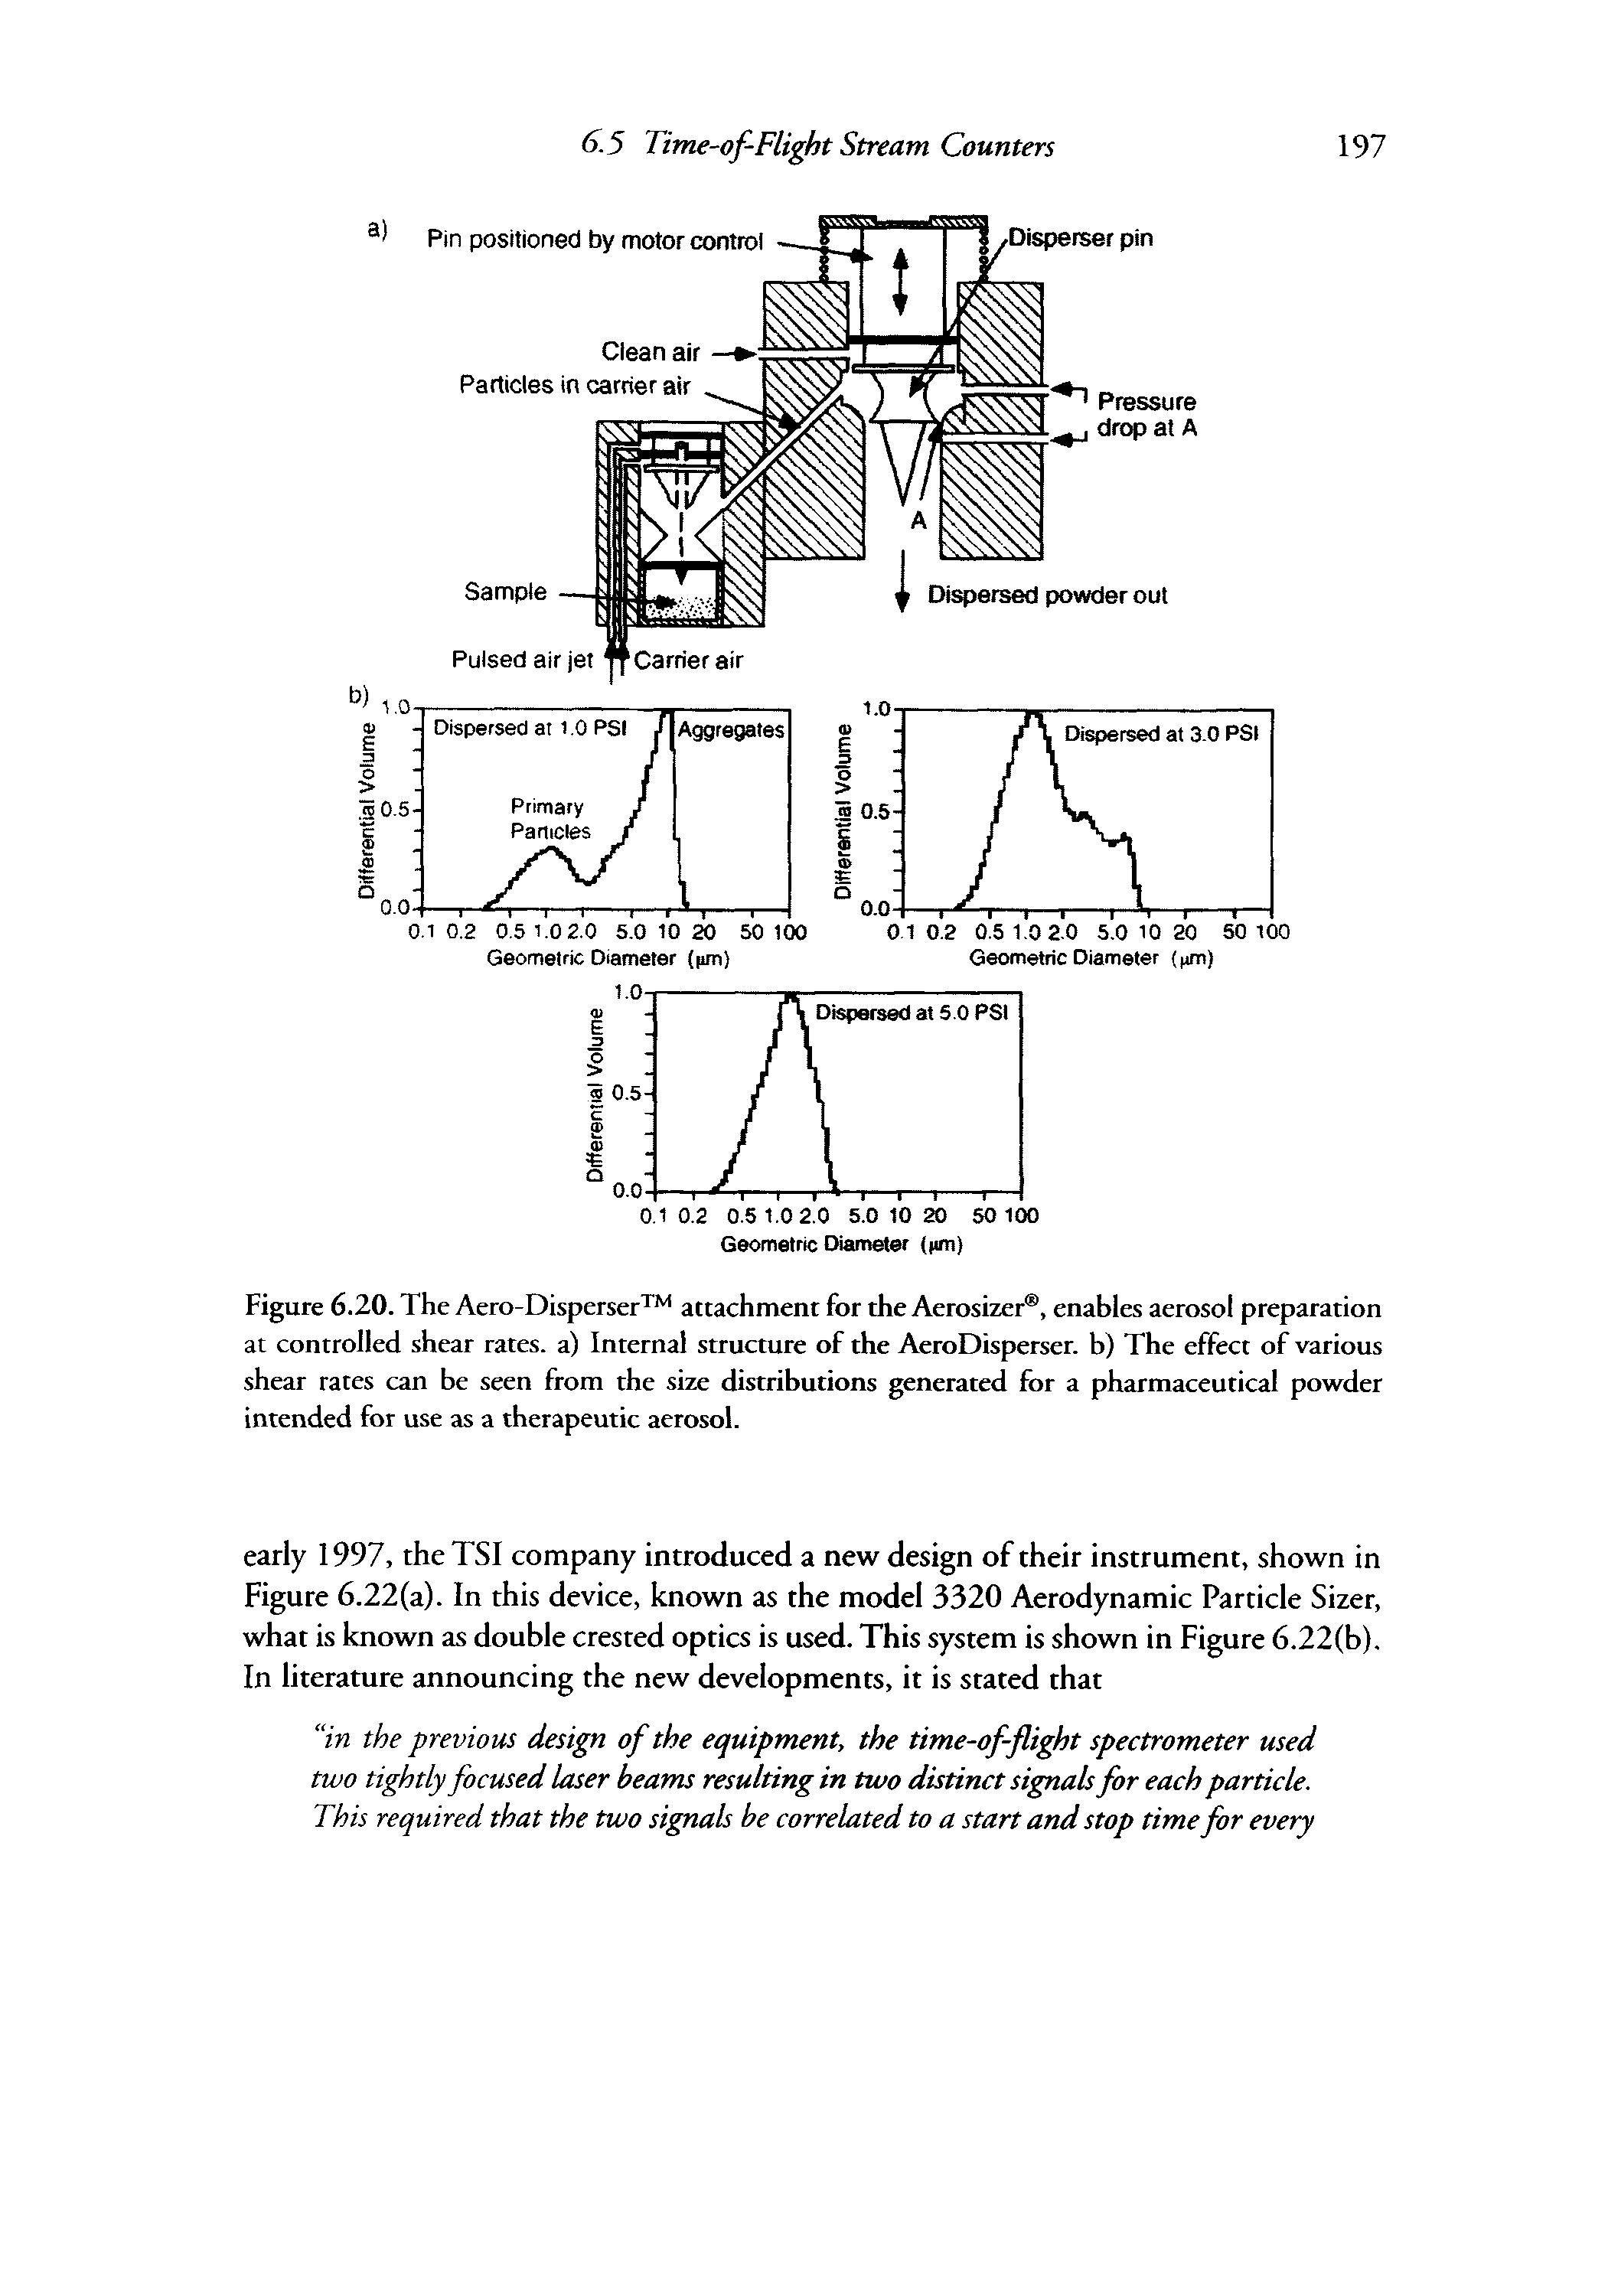 Figure 6.20. The Aero-Disperser attachment for the Aerosizer , enables aerosol preparation at controlled shear rates, a) Internal structure of the AeroDisperser. b) The effect of various shear rates can be seen from the size distributions generated for a pharmaceutical powder intended for use as a therapeutic aerosol.